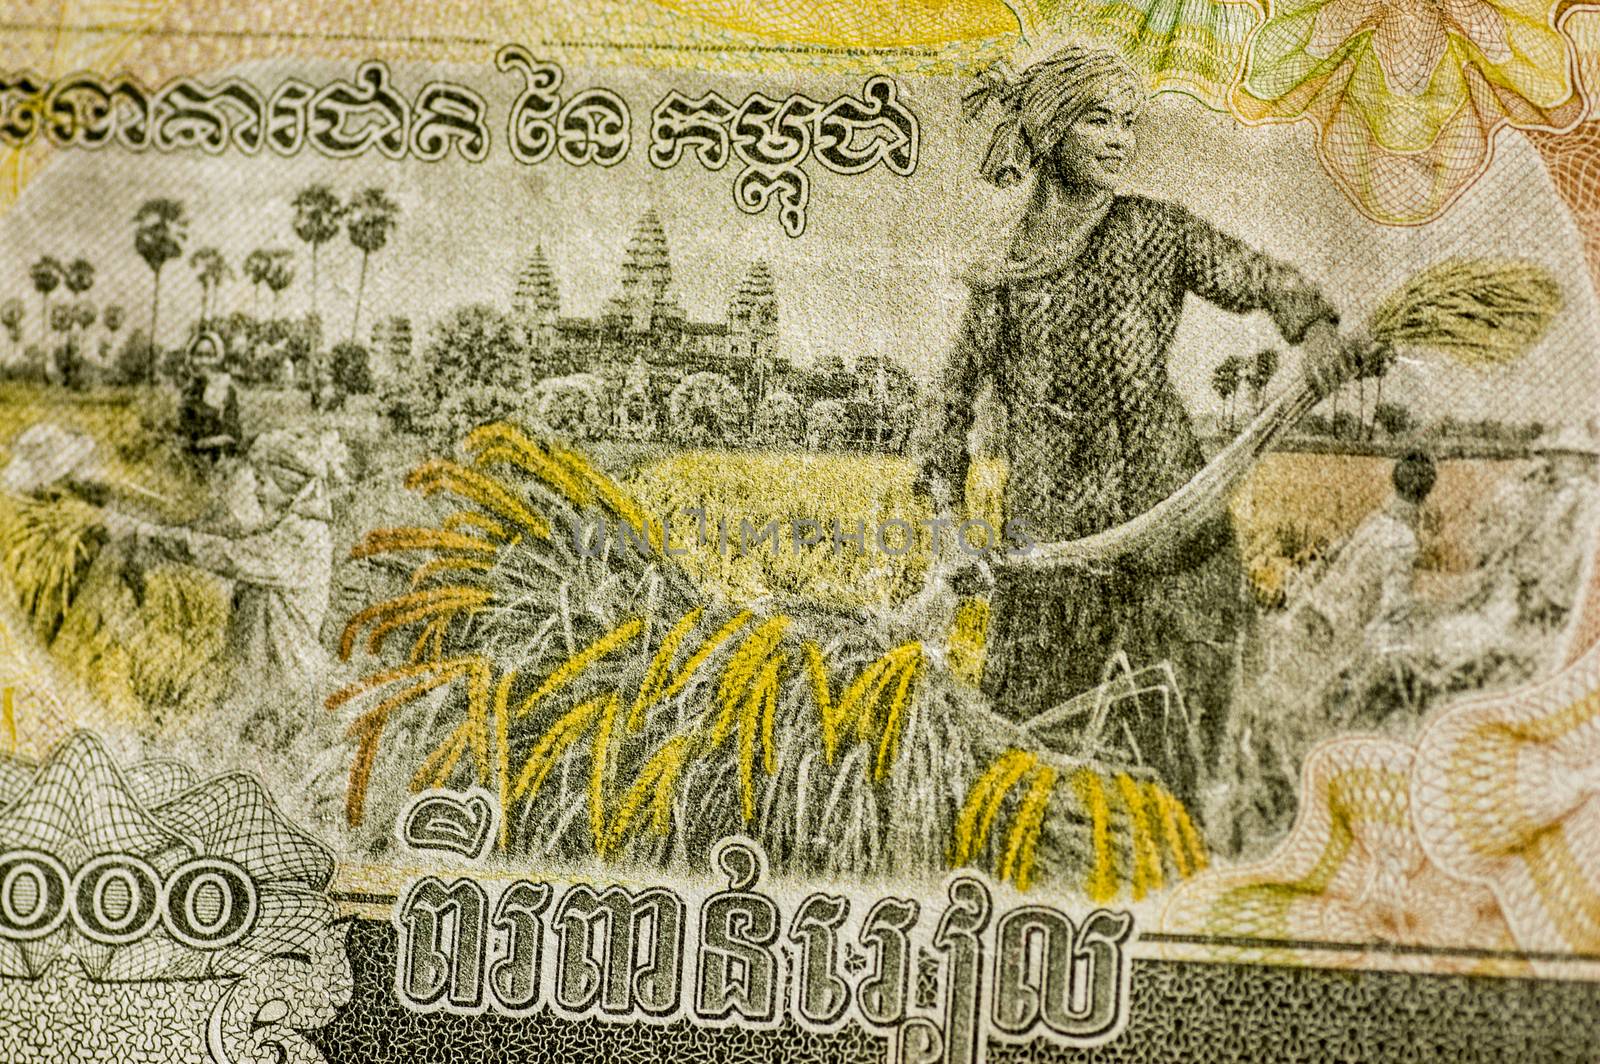 A Cambodia banknote for 2,000 Riels showing a woman harvesting rice with Angkor Wat temple in the background. Used banknote, photographed at an angle.